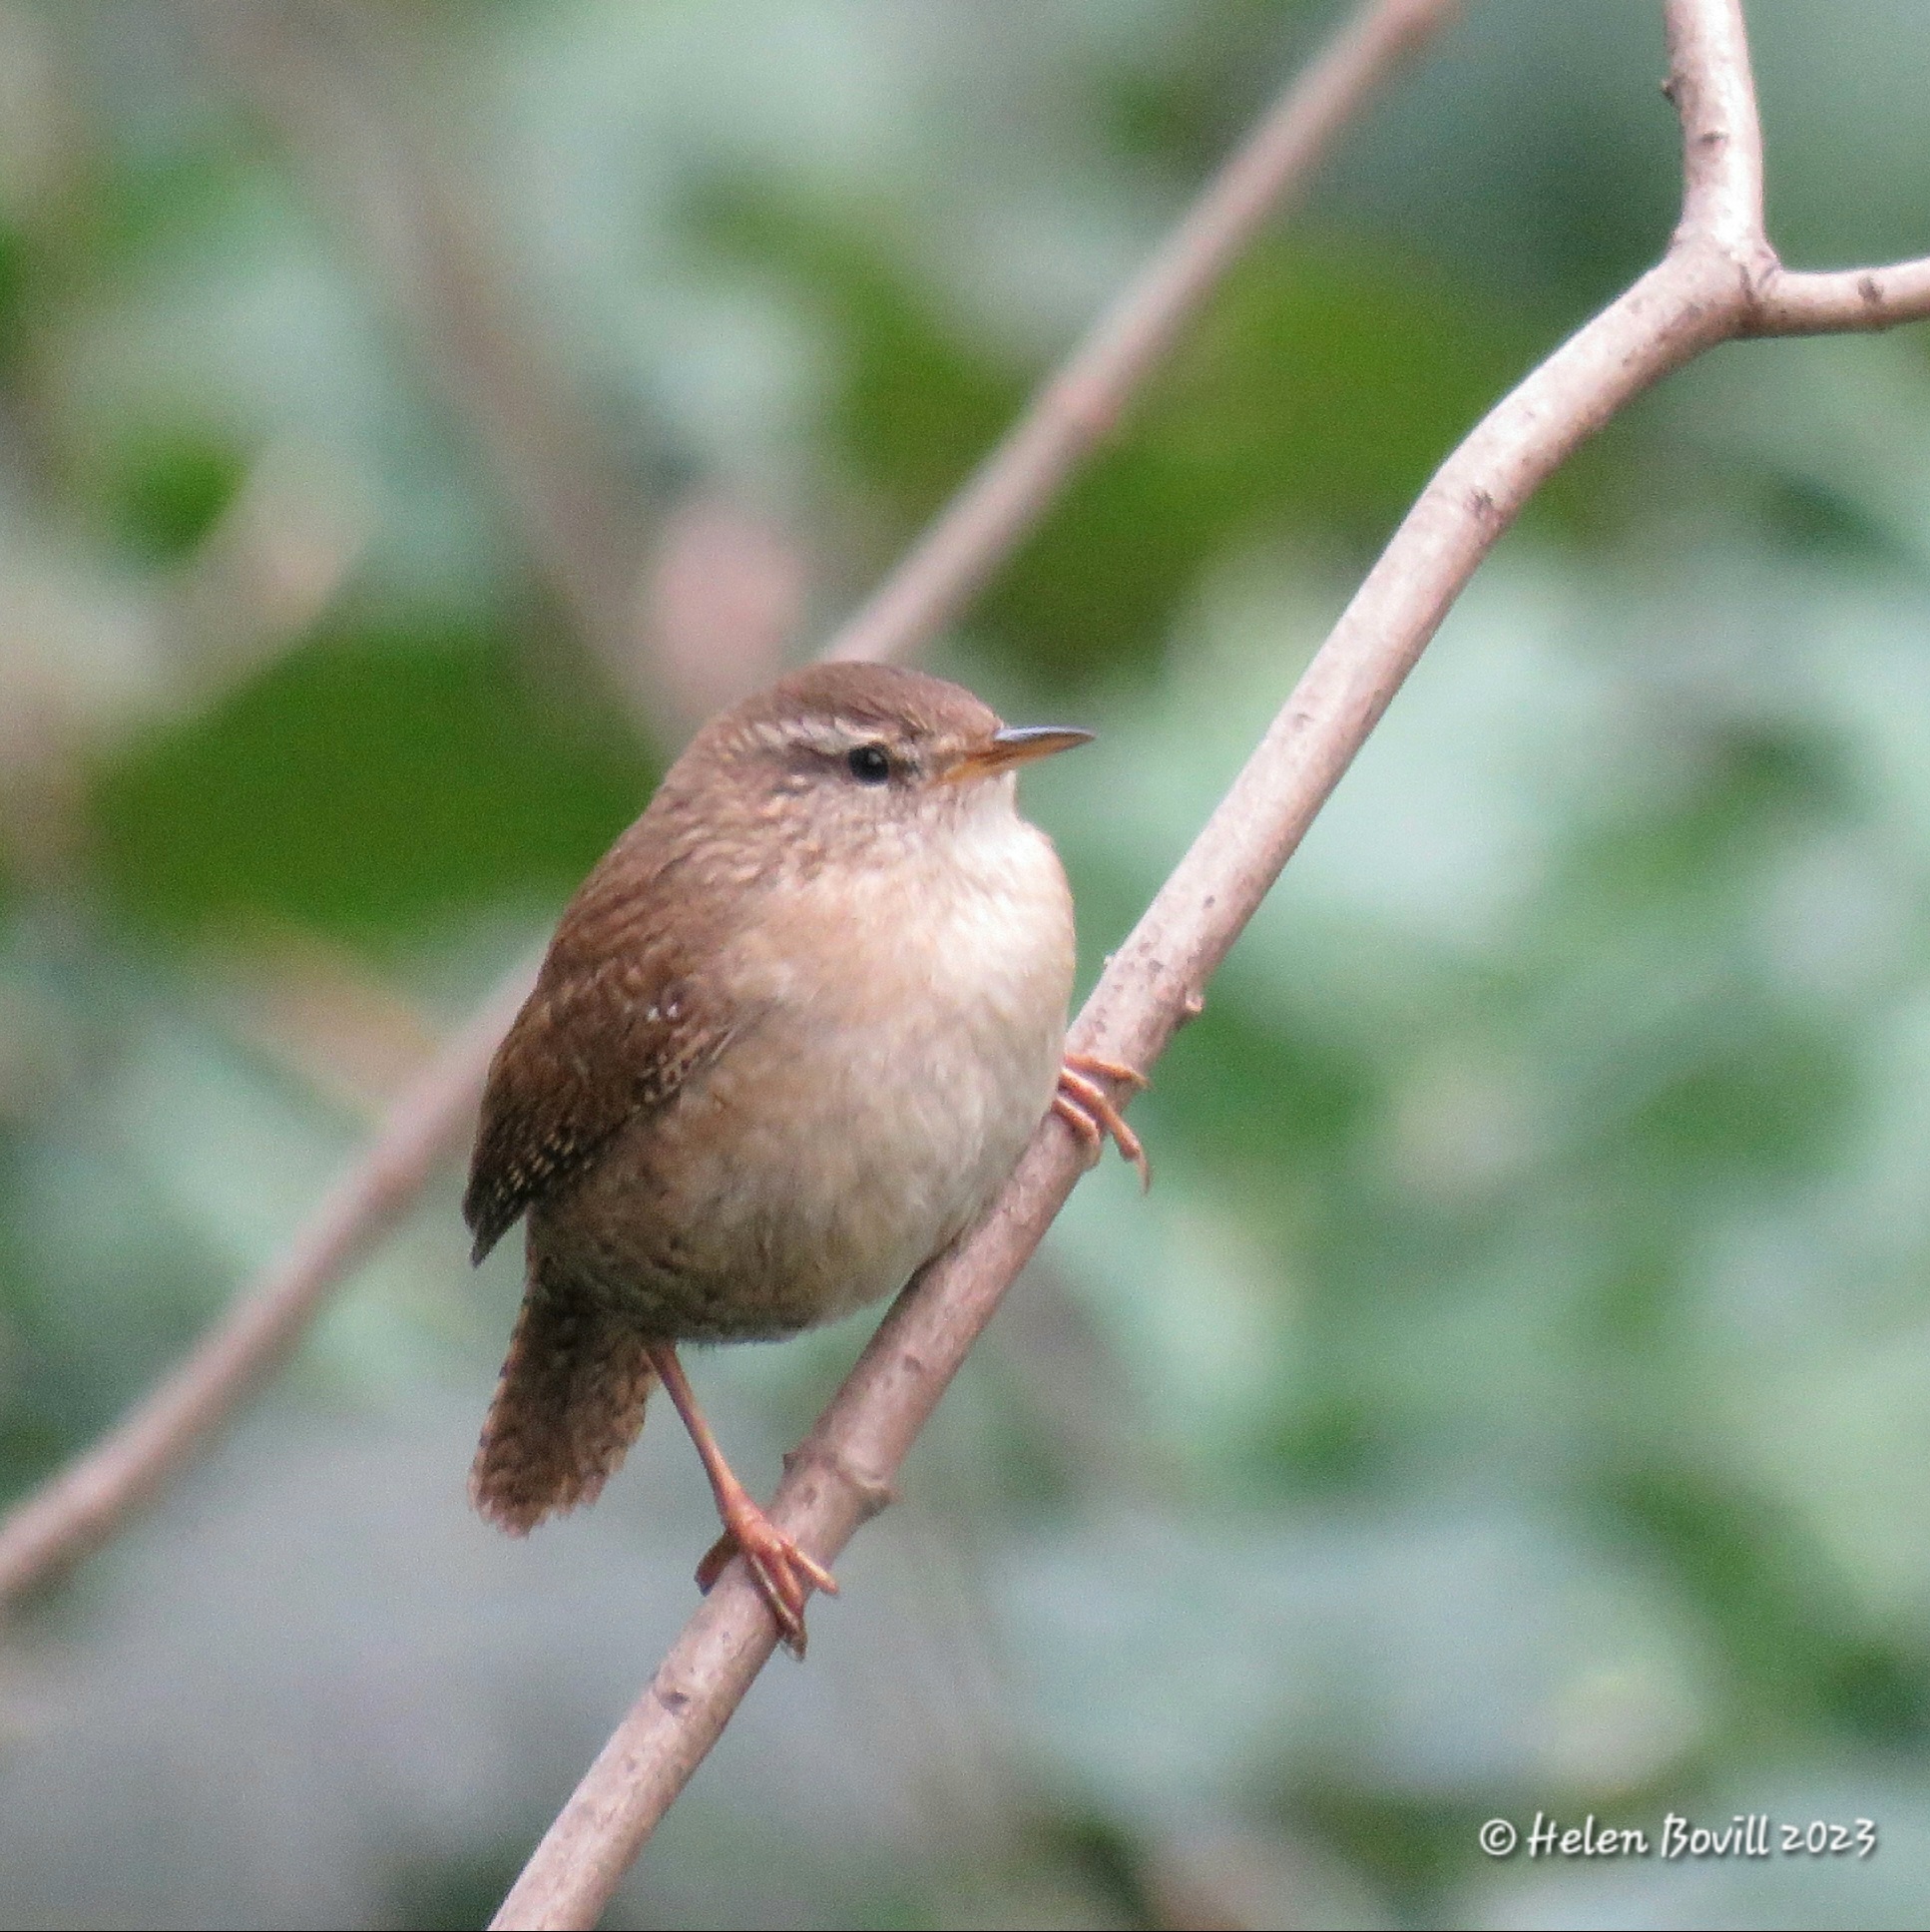 Wren perched on a branch